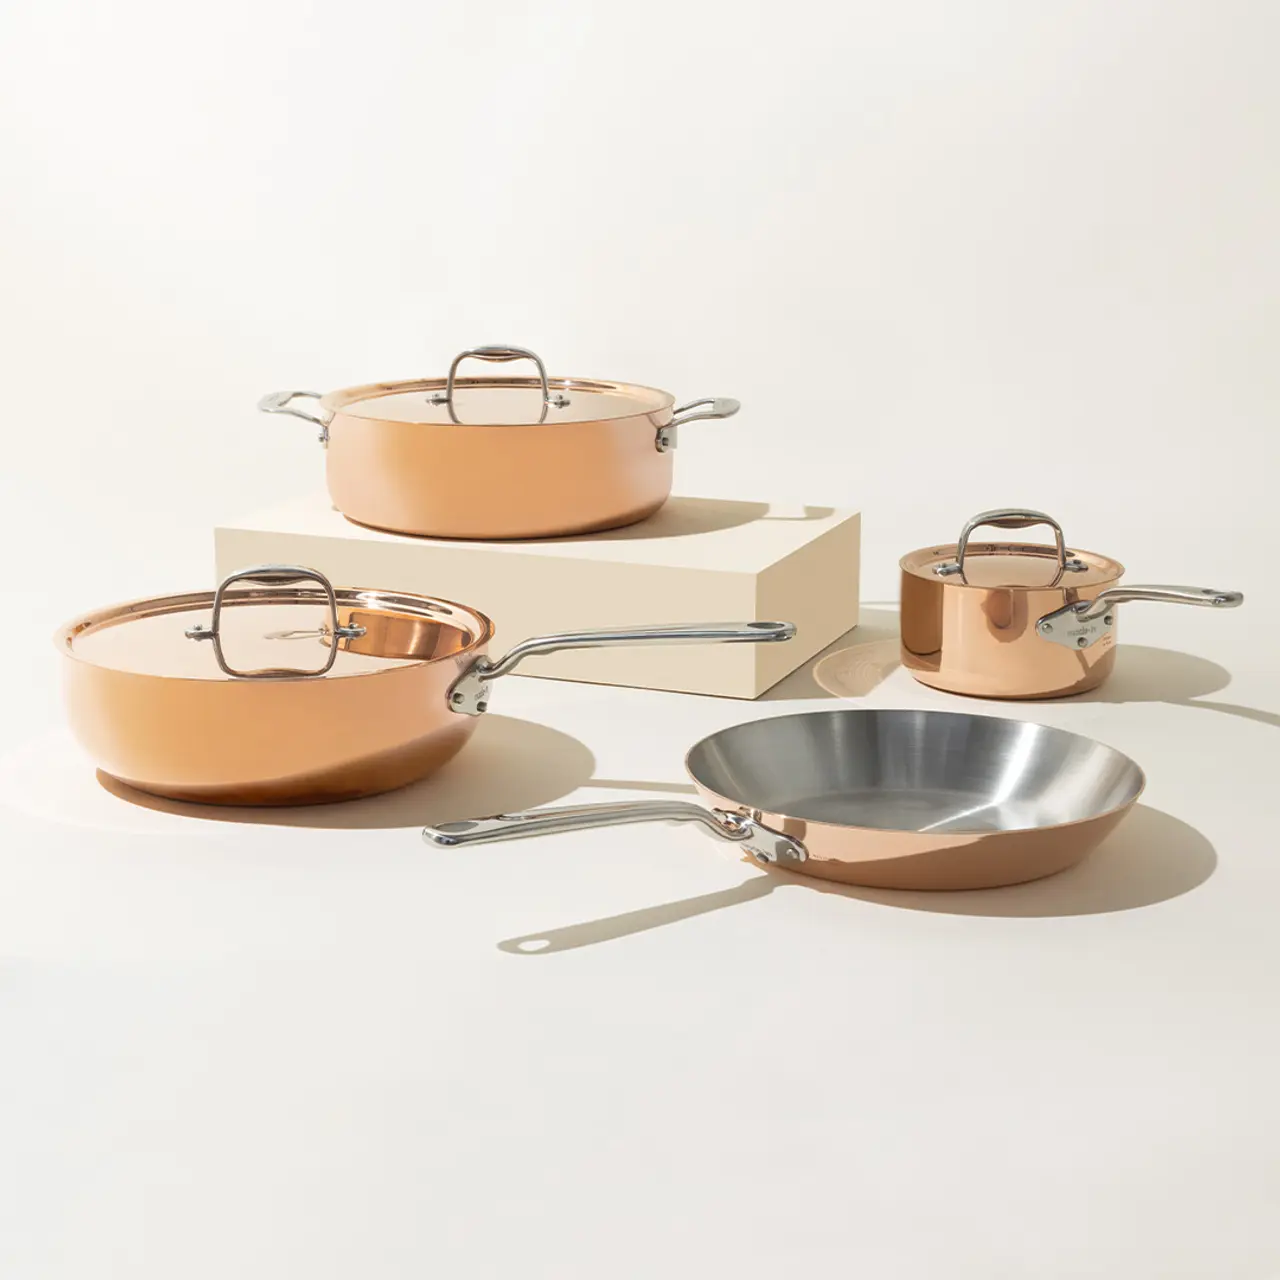 A set of elegant copper-colored cookware, including two pots with lids, a saucepan, and a skillet, artistically arranged on a neutral background.